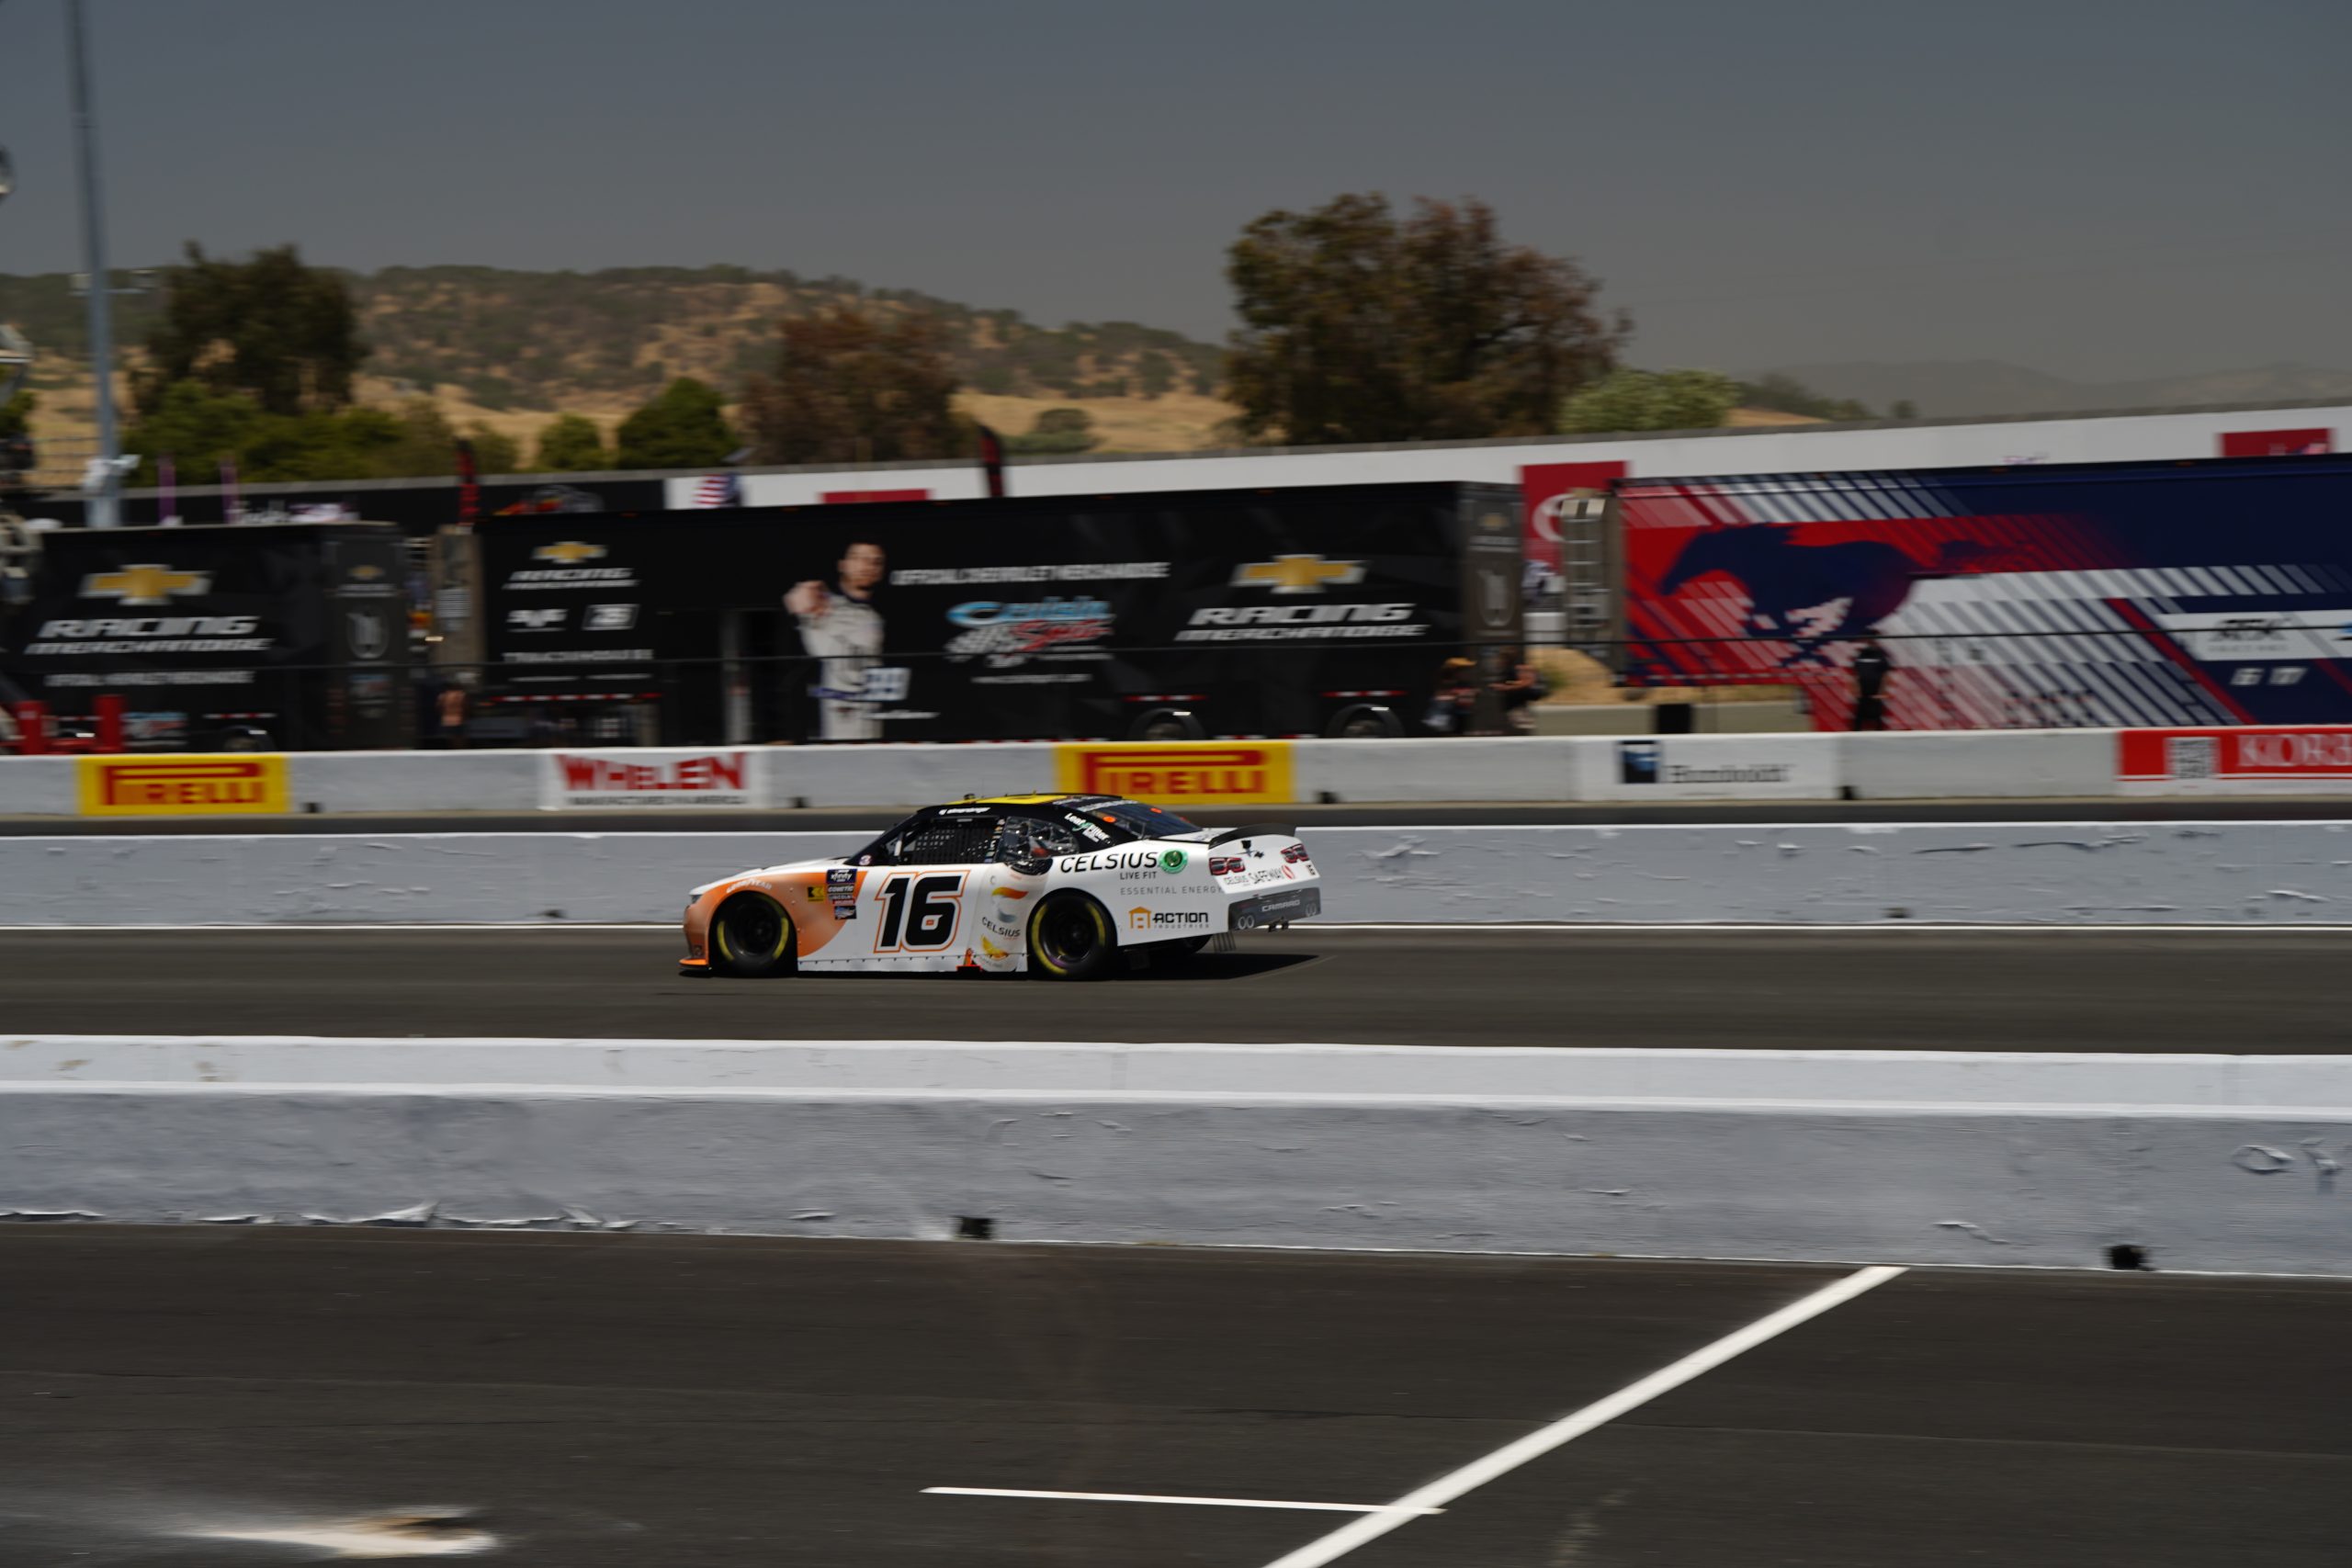 The No. 16 Celsius Camaro on track during practice on Friday. (Photo: Aaron Brink | The Podium Finish)